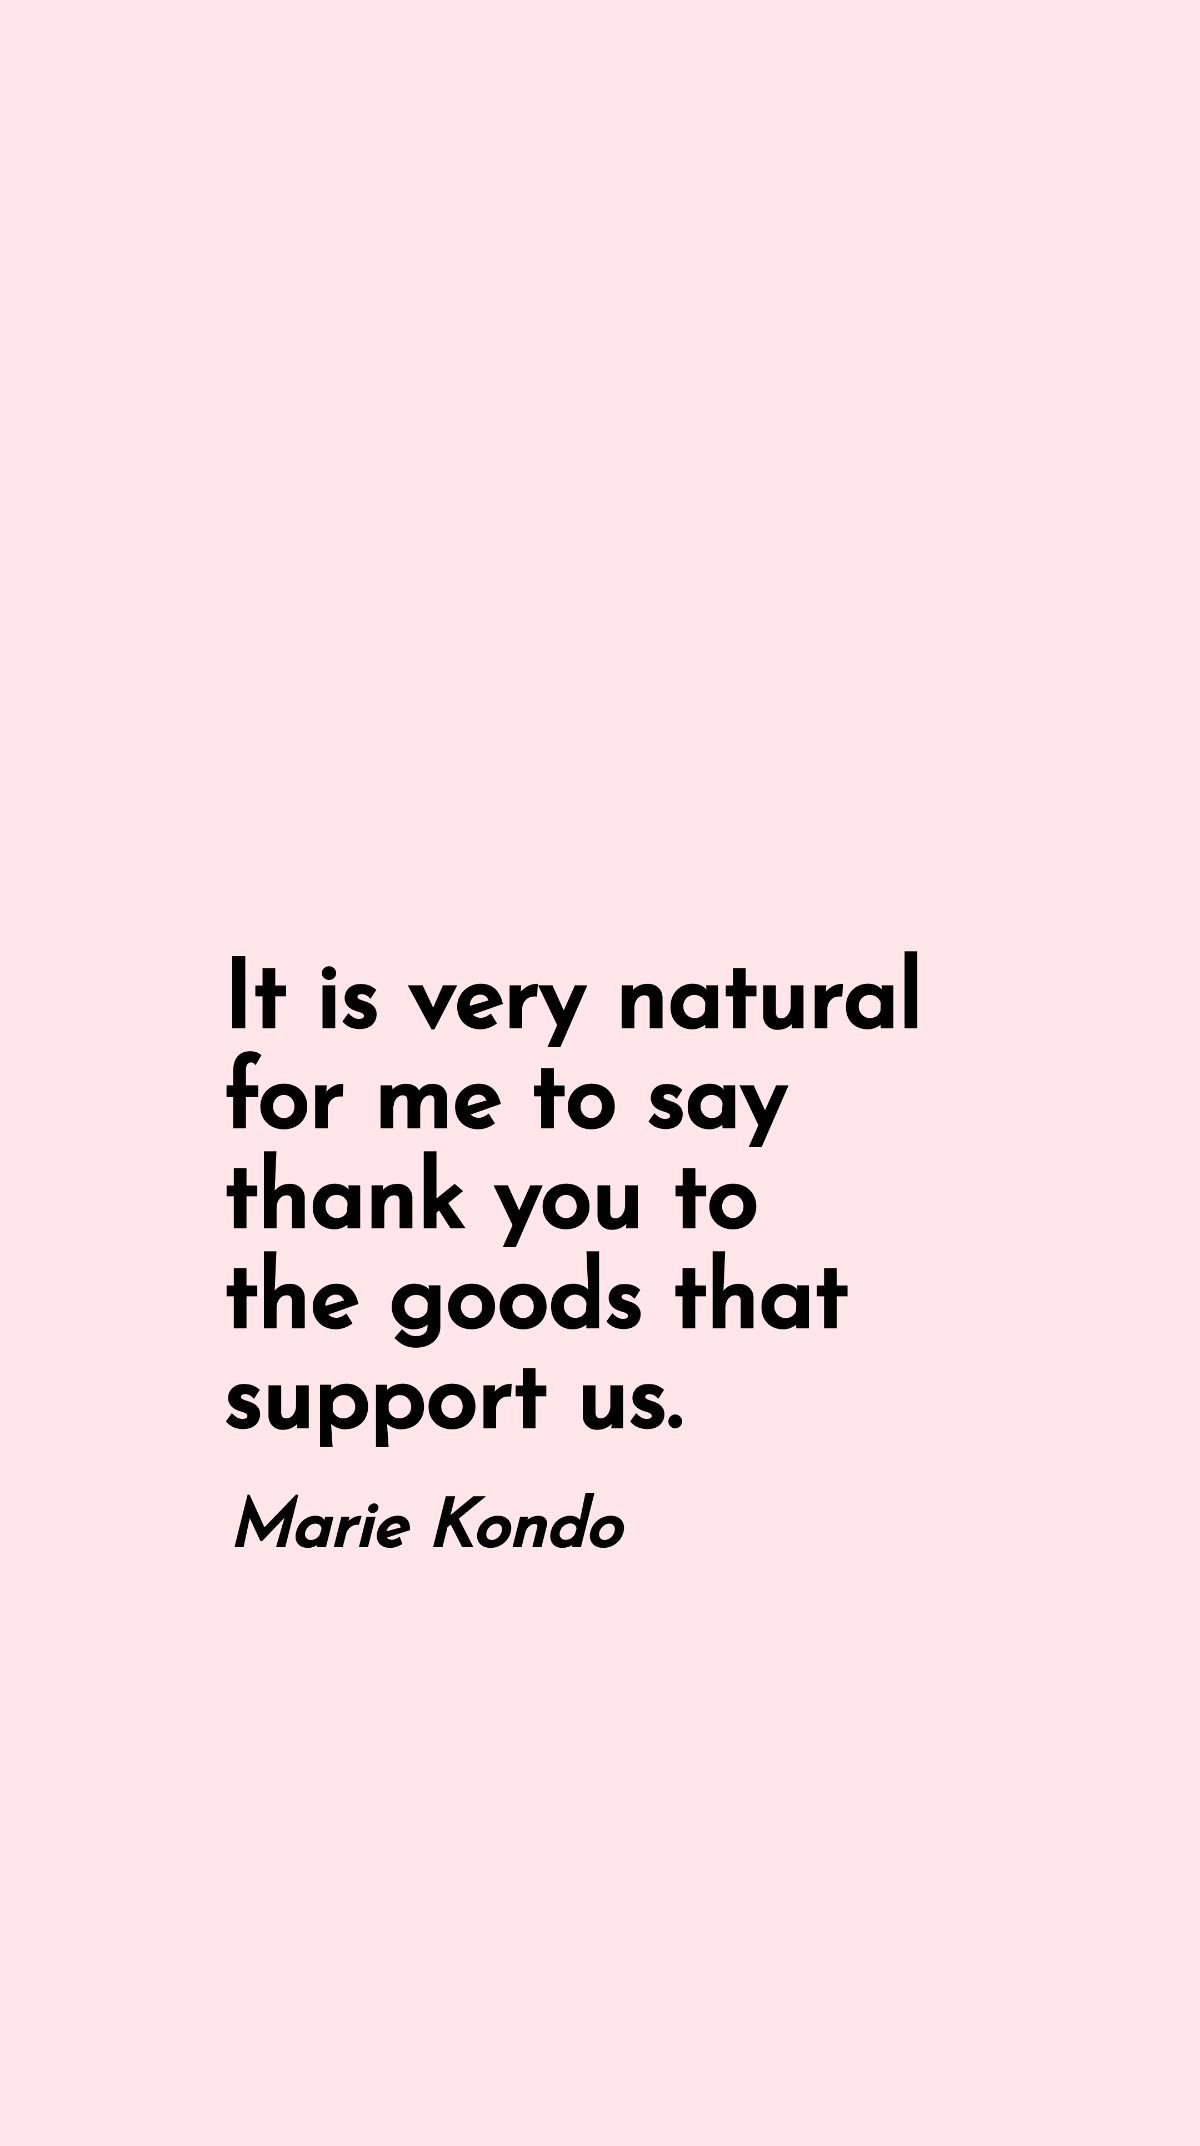 Marie Kondo - It is very natural for me to say thank you to the goods that support us. Template